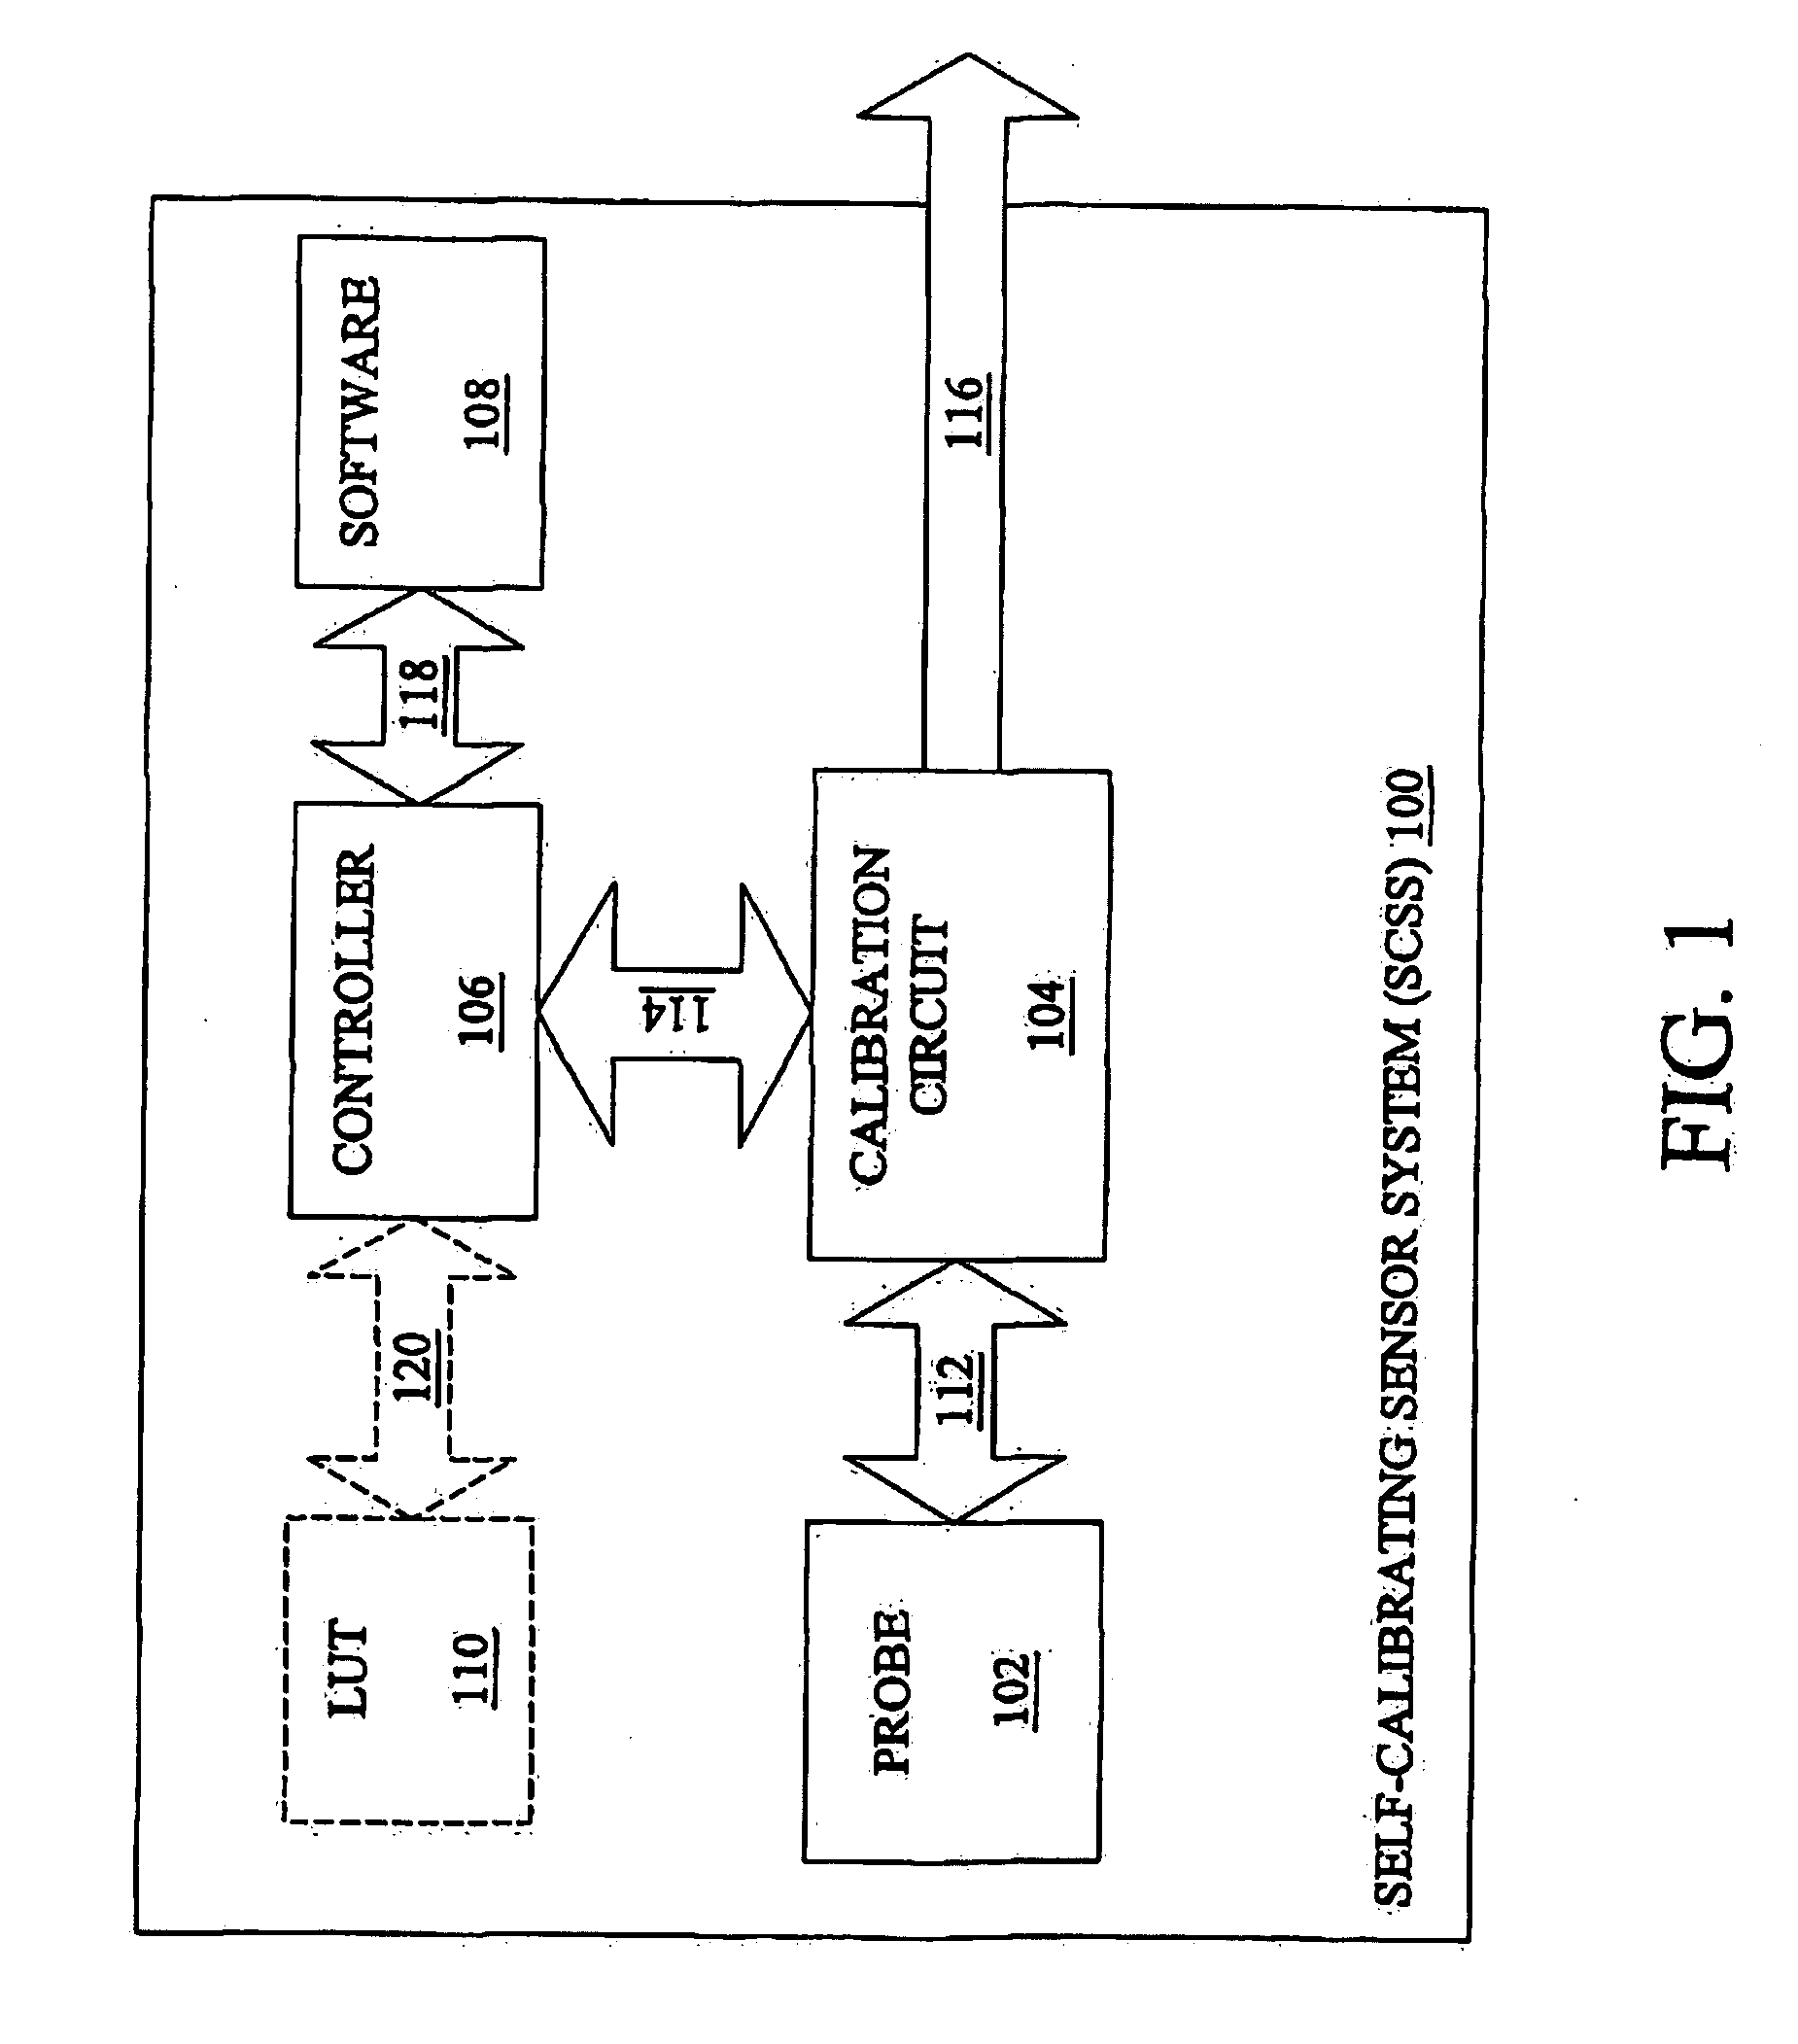 System and method for a non-invasive medical sensor